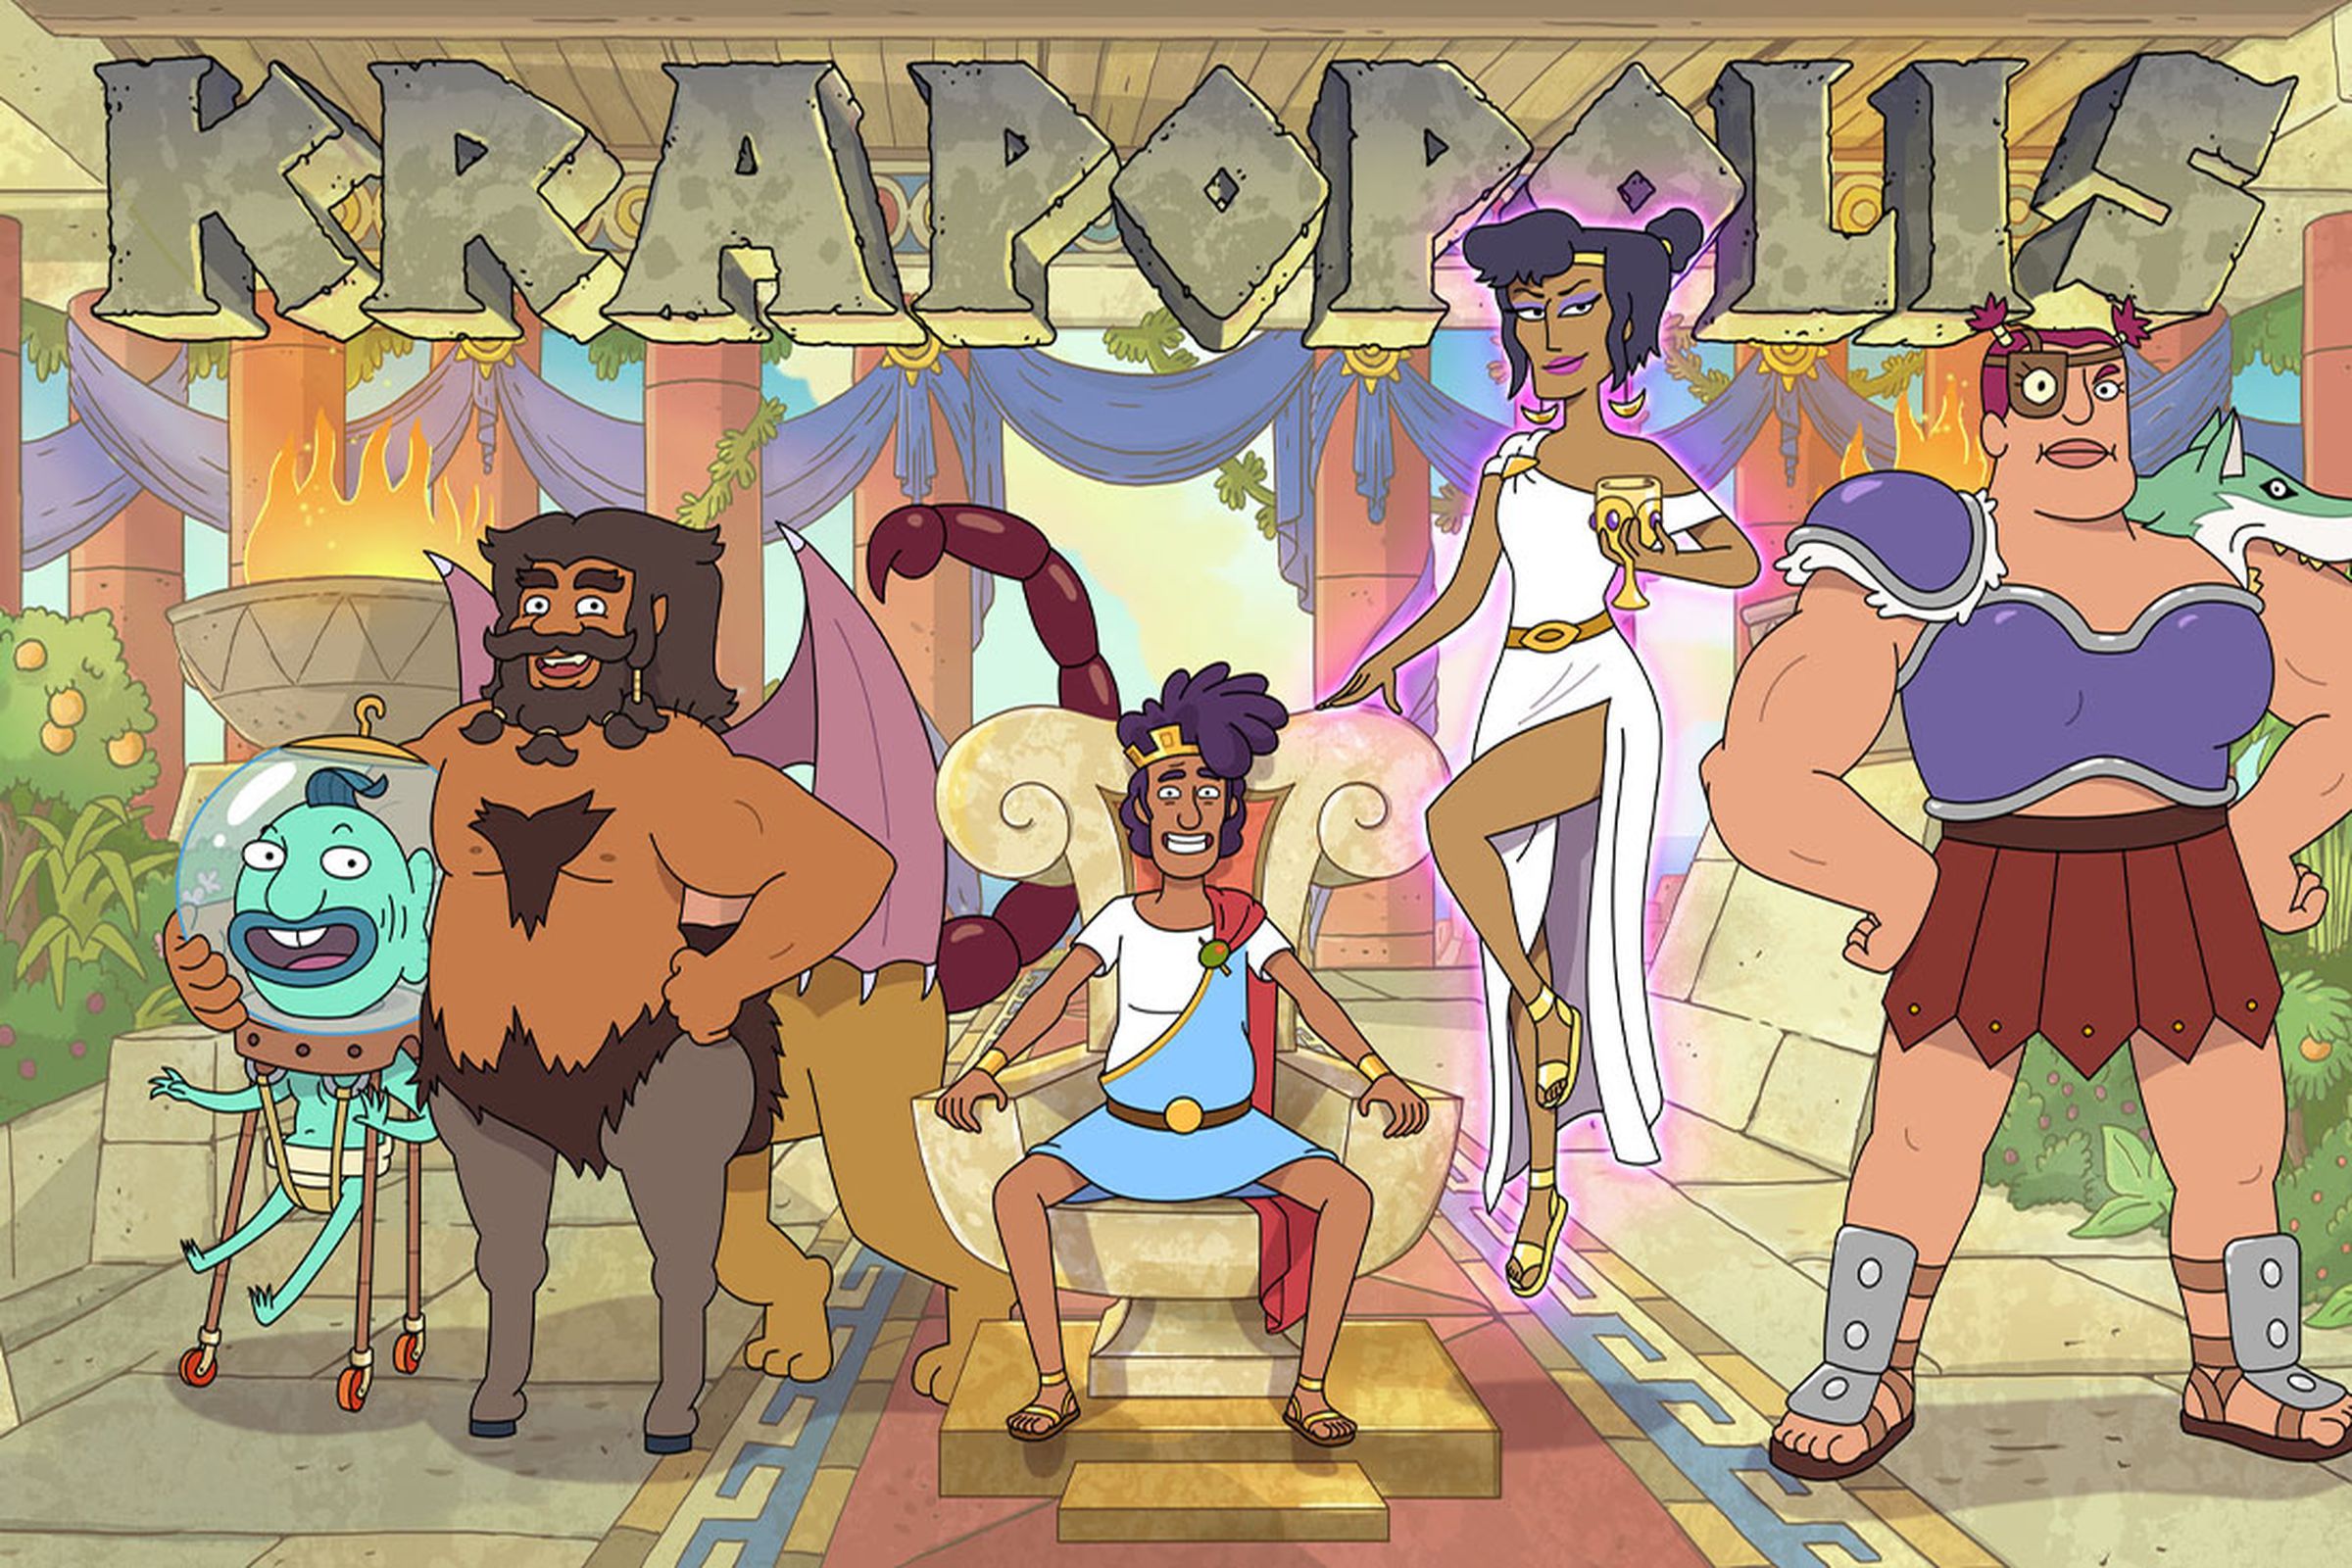 From left to right: an illustration of a mint green man with his head in a glass bowl suspended on four long legs that end in wheels; a bearded manticore; a man in a toga sitting on a throne; a floating woman with purple hair in a toga holding a golden chalice; and a muscular woman in lorica segmentata.